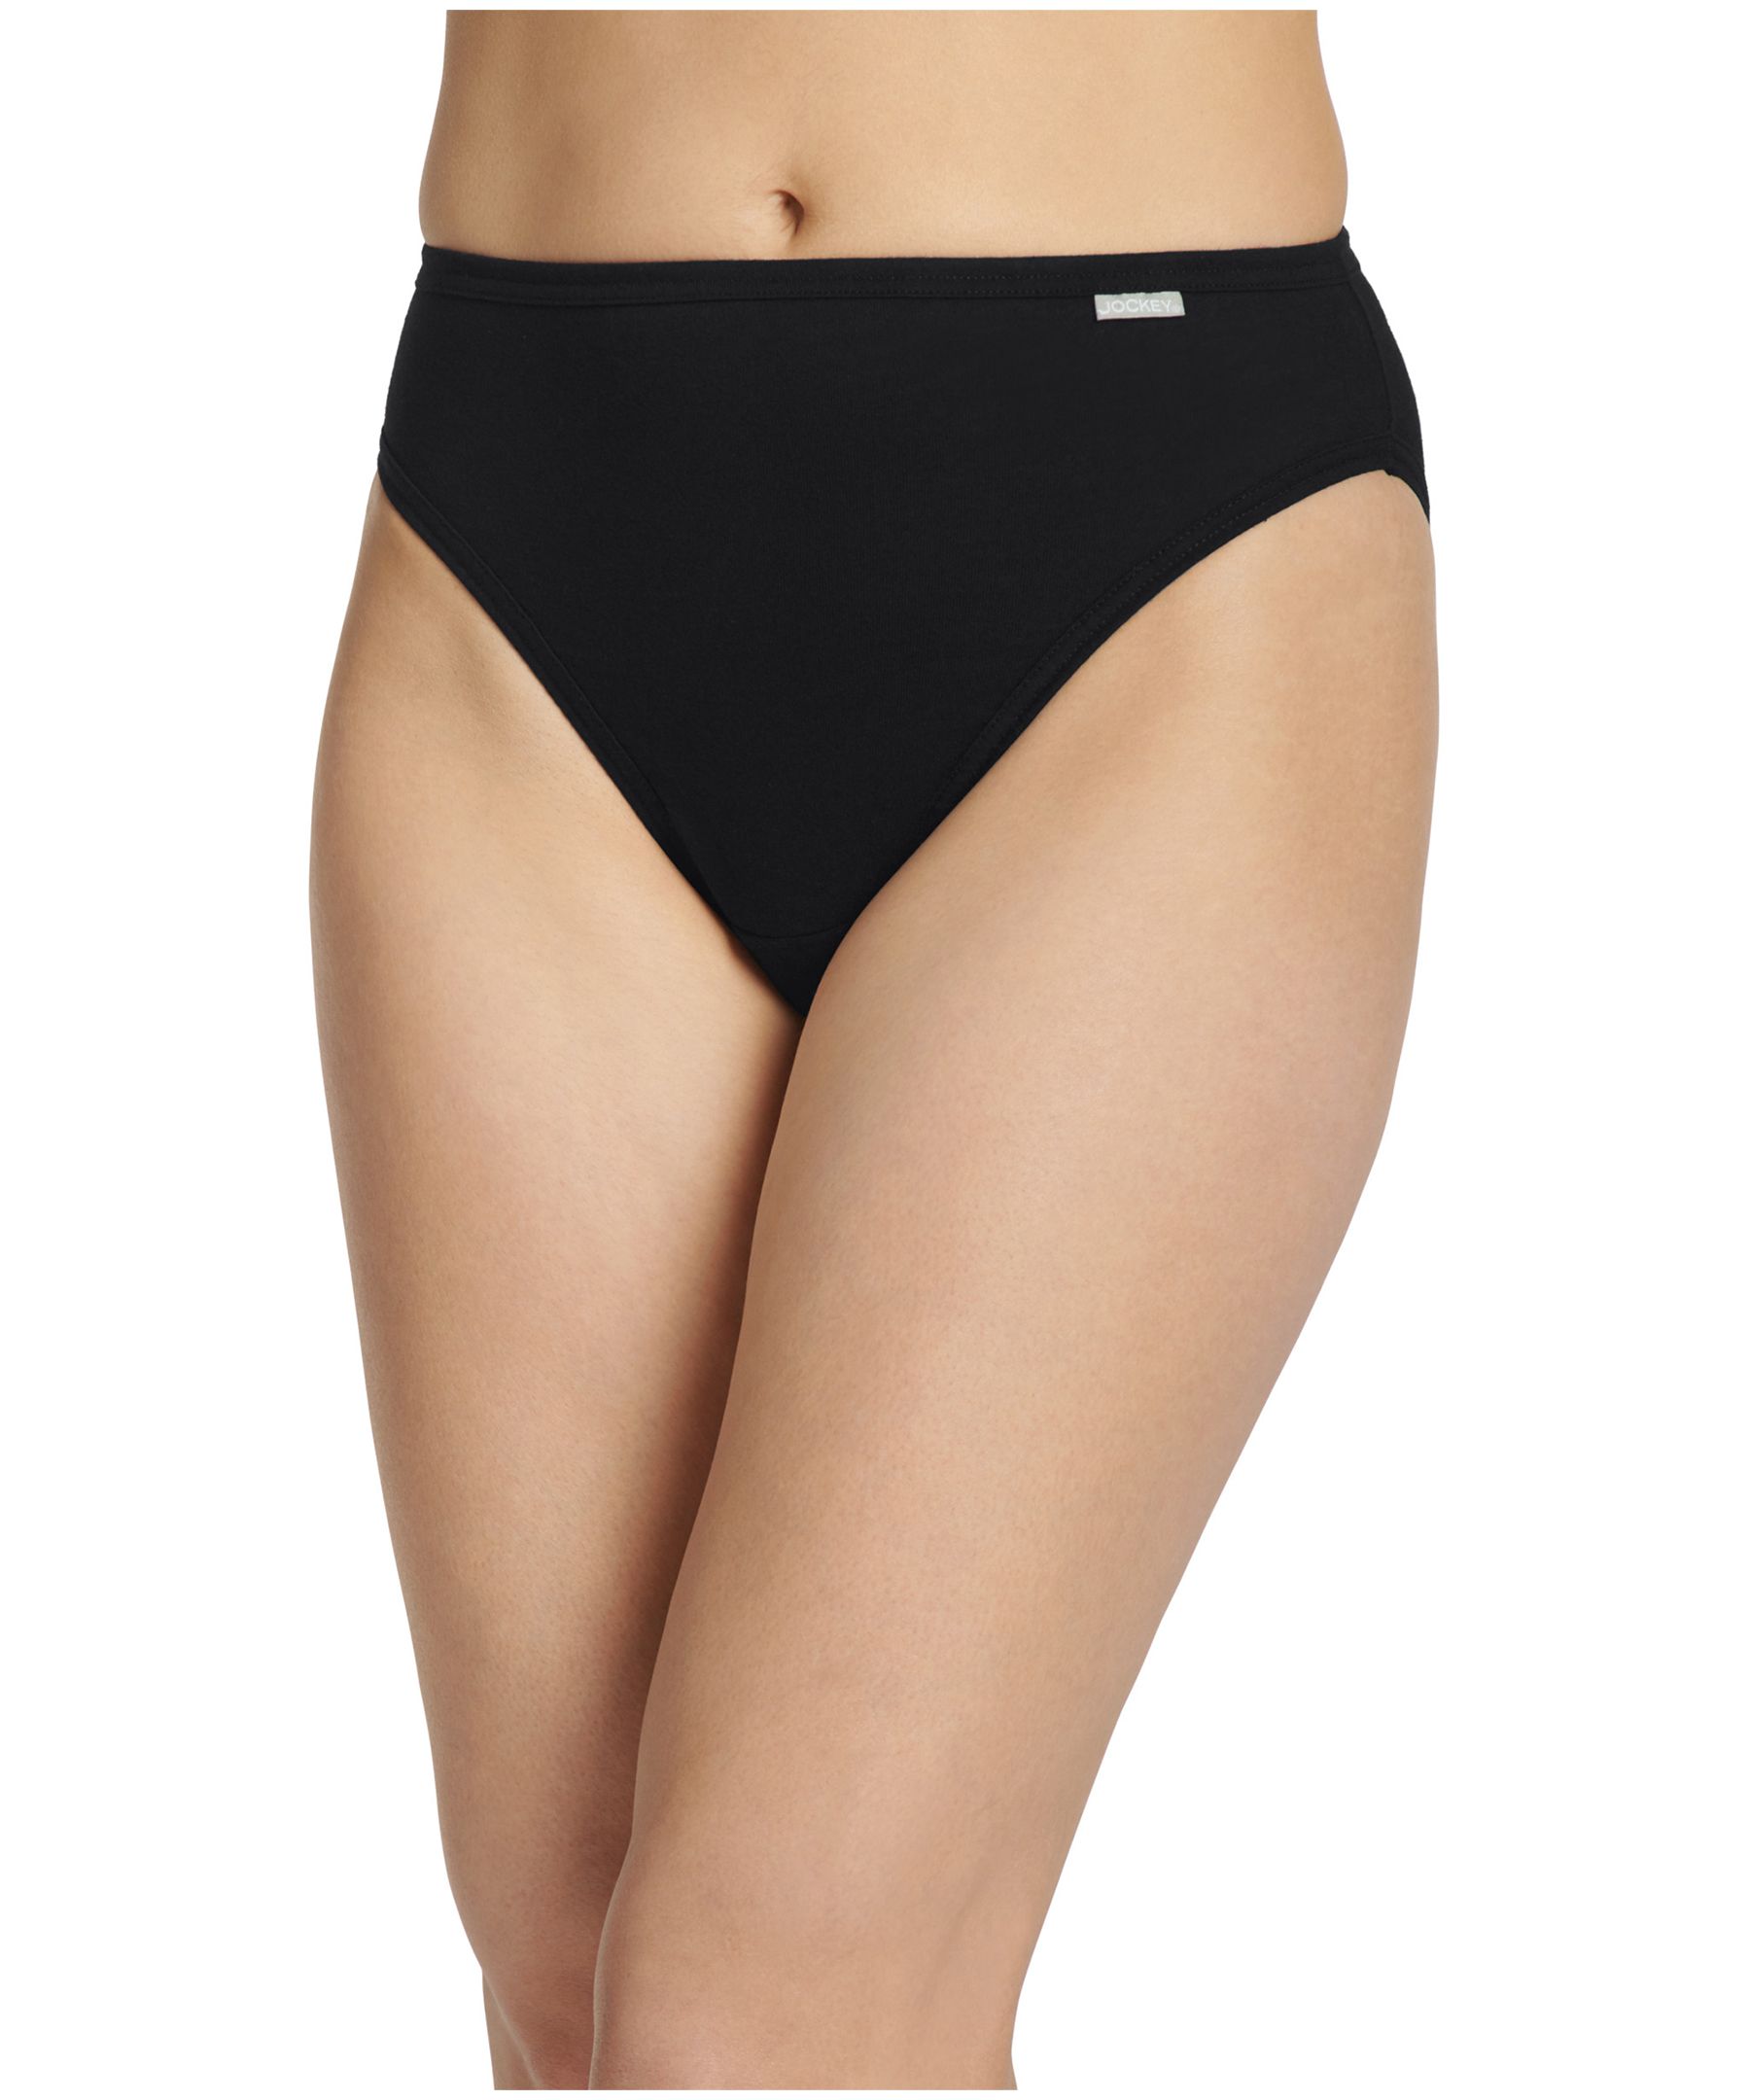 Police Auctions Canada - Women's Jockey Elance Full Coverage Cotton Briefs,  3 Pack - Size 8/XL (517510L)